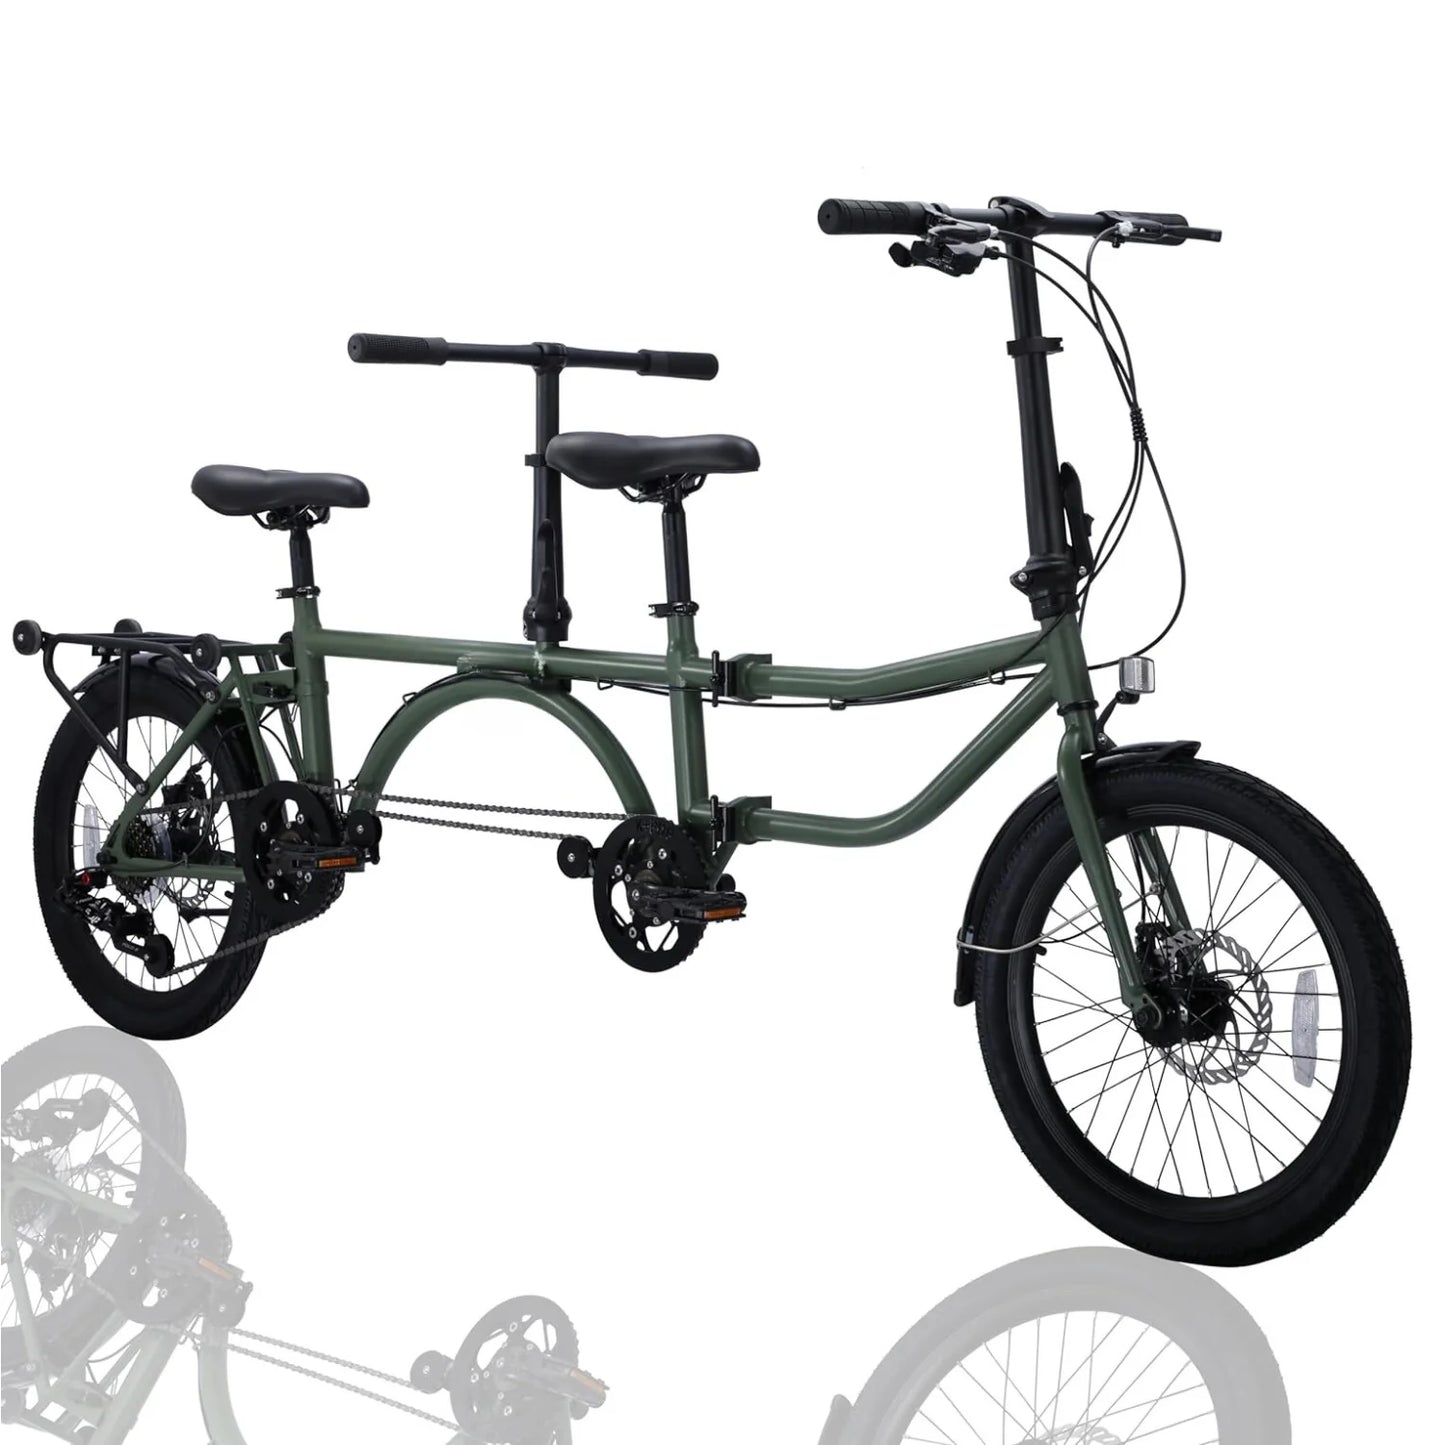 20-Inch Folding Tandem Bike - Brompton 2-Person, 7-Speed City Travel Bicycle for Adults